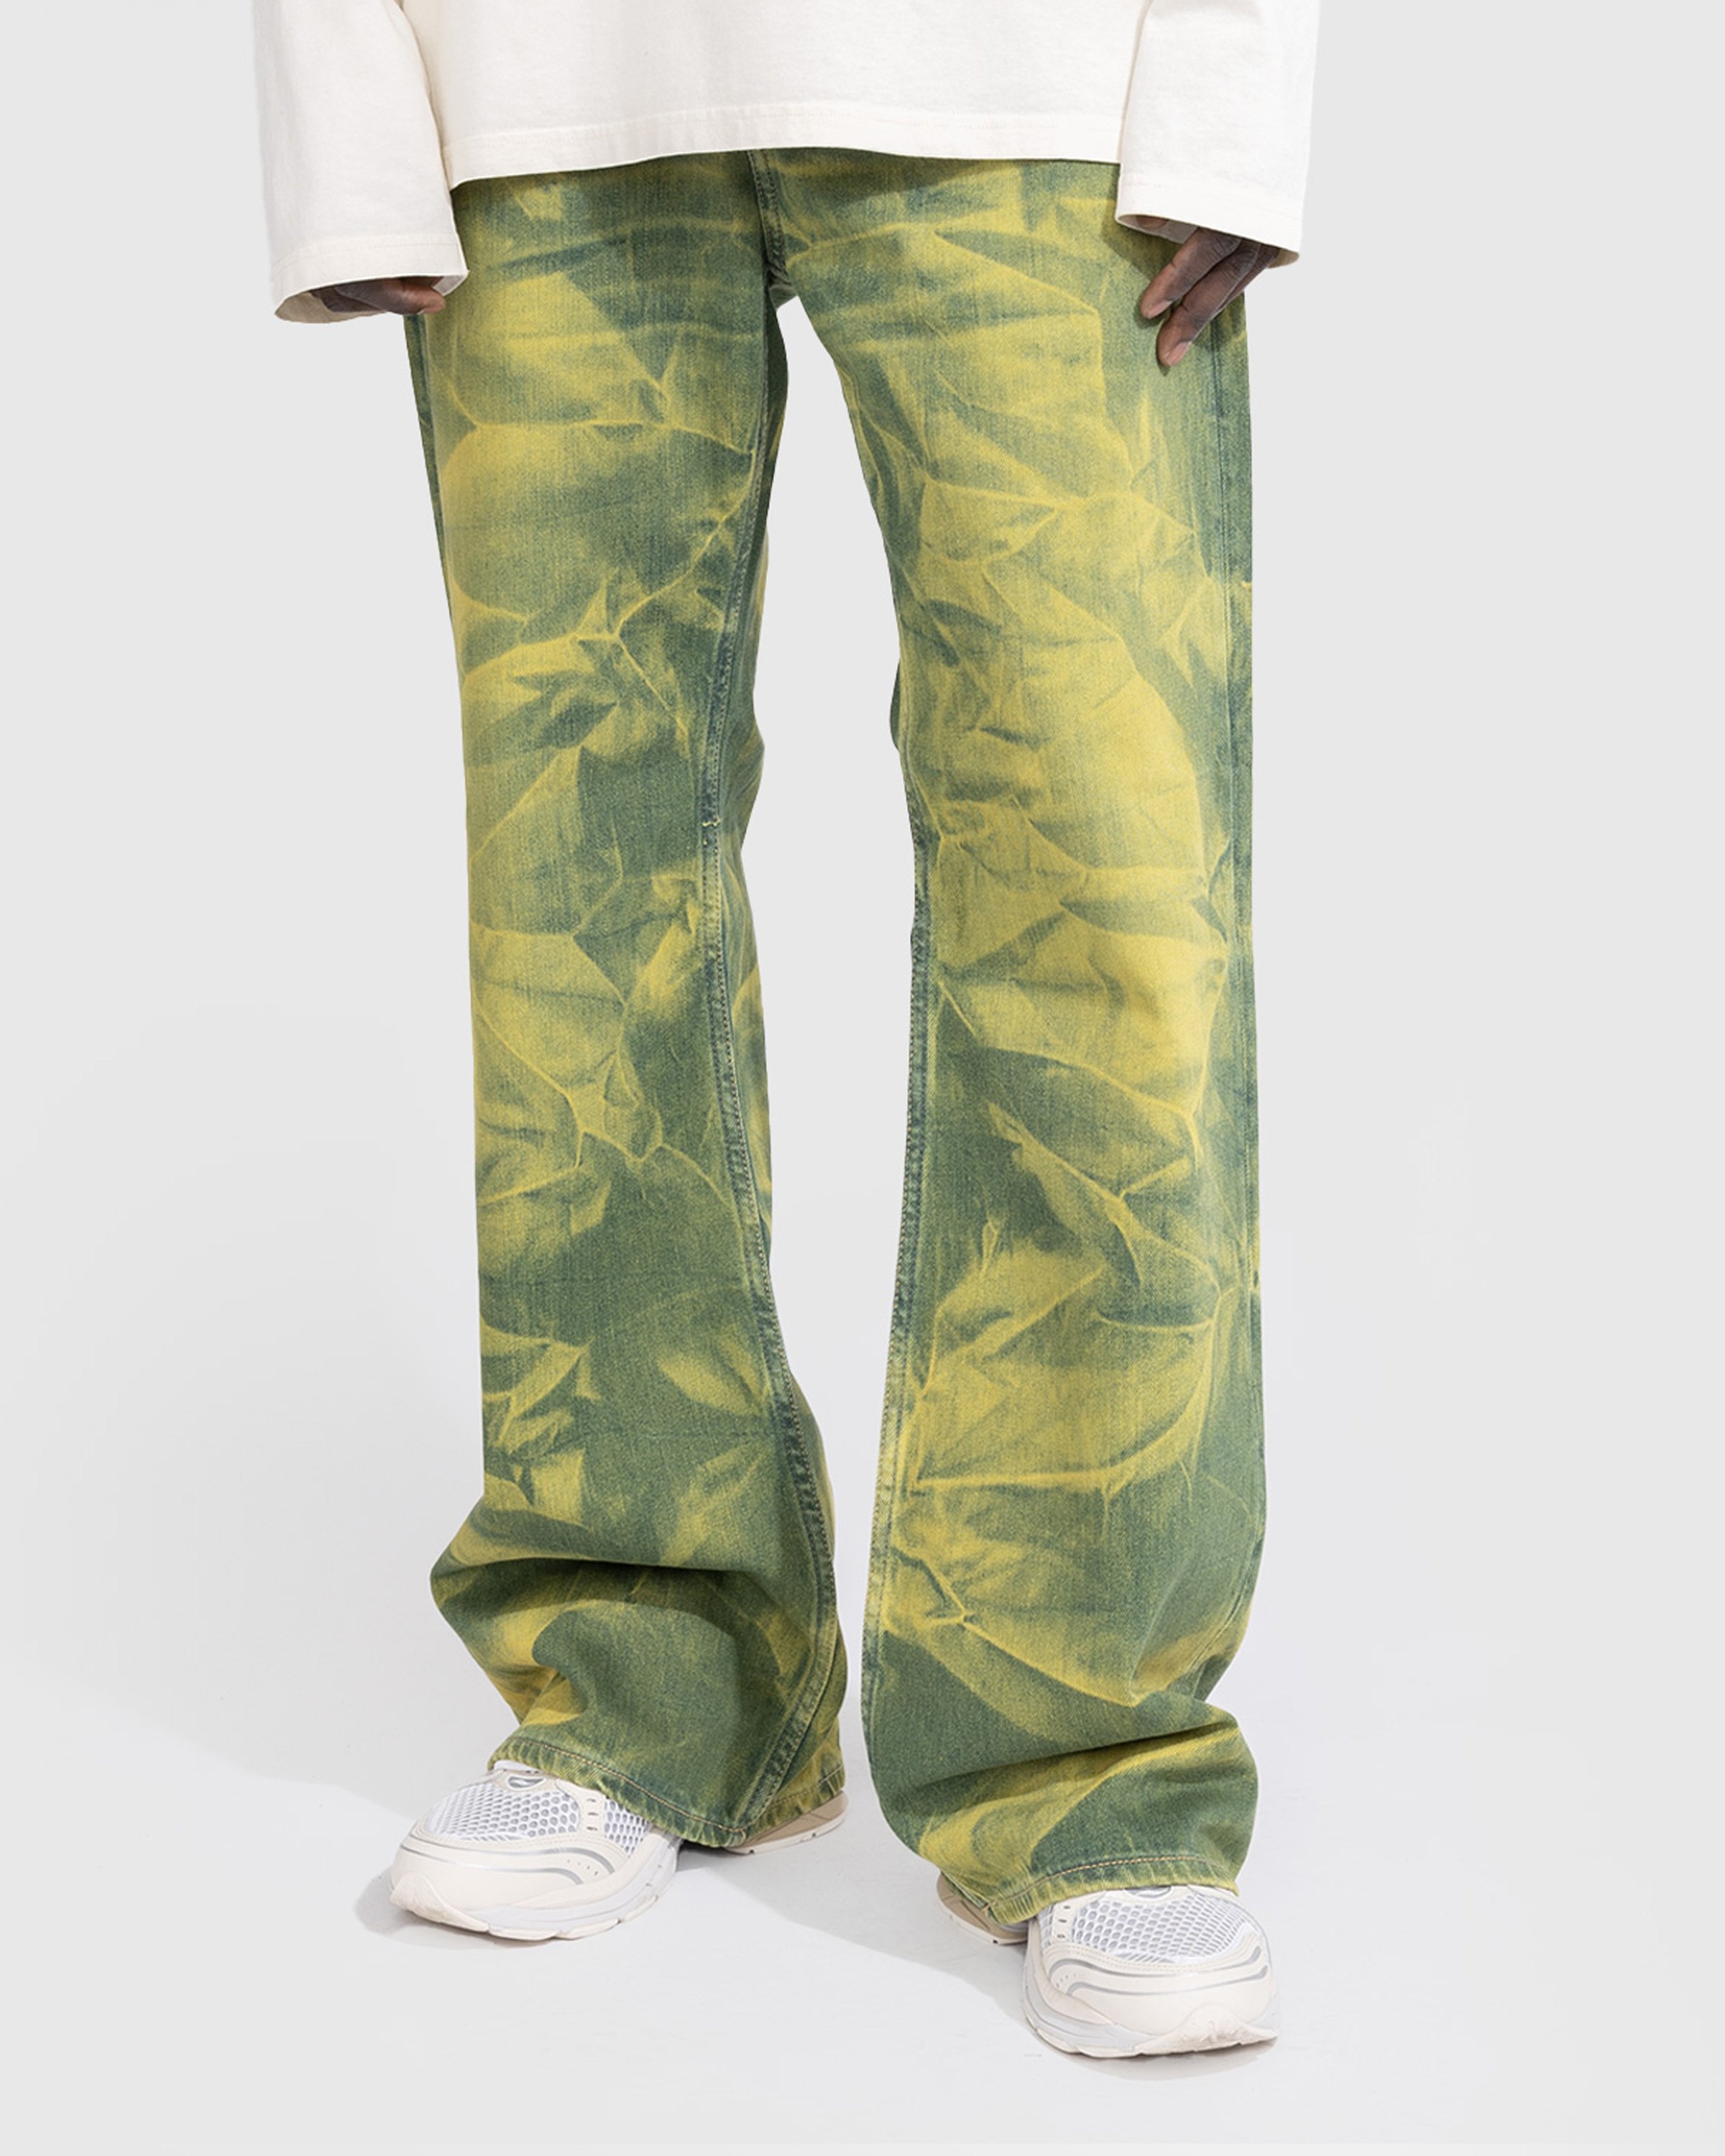 Acne Studios - Loose Fit Jeans 2021 Yellow/Blue - Clothing - Multi - Image 4